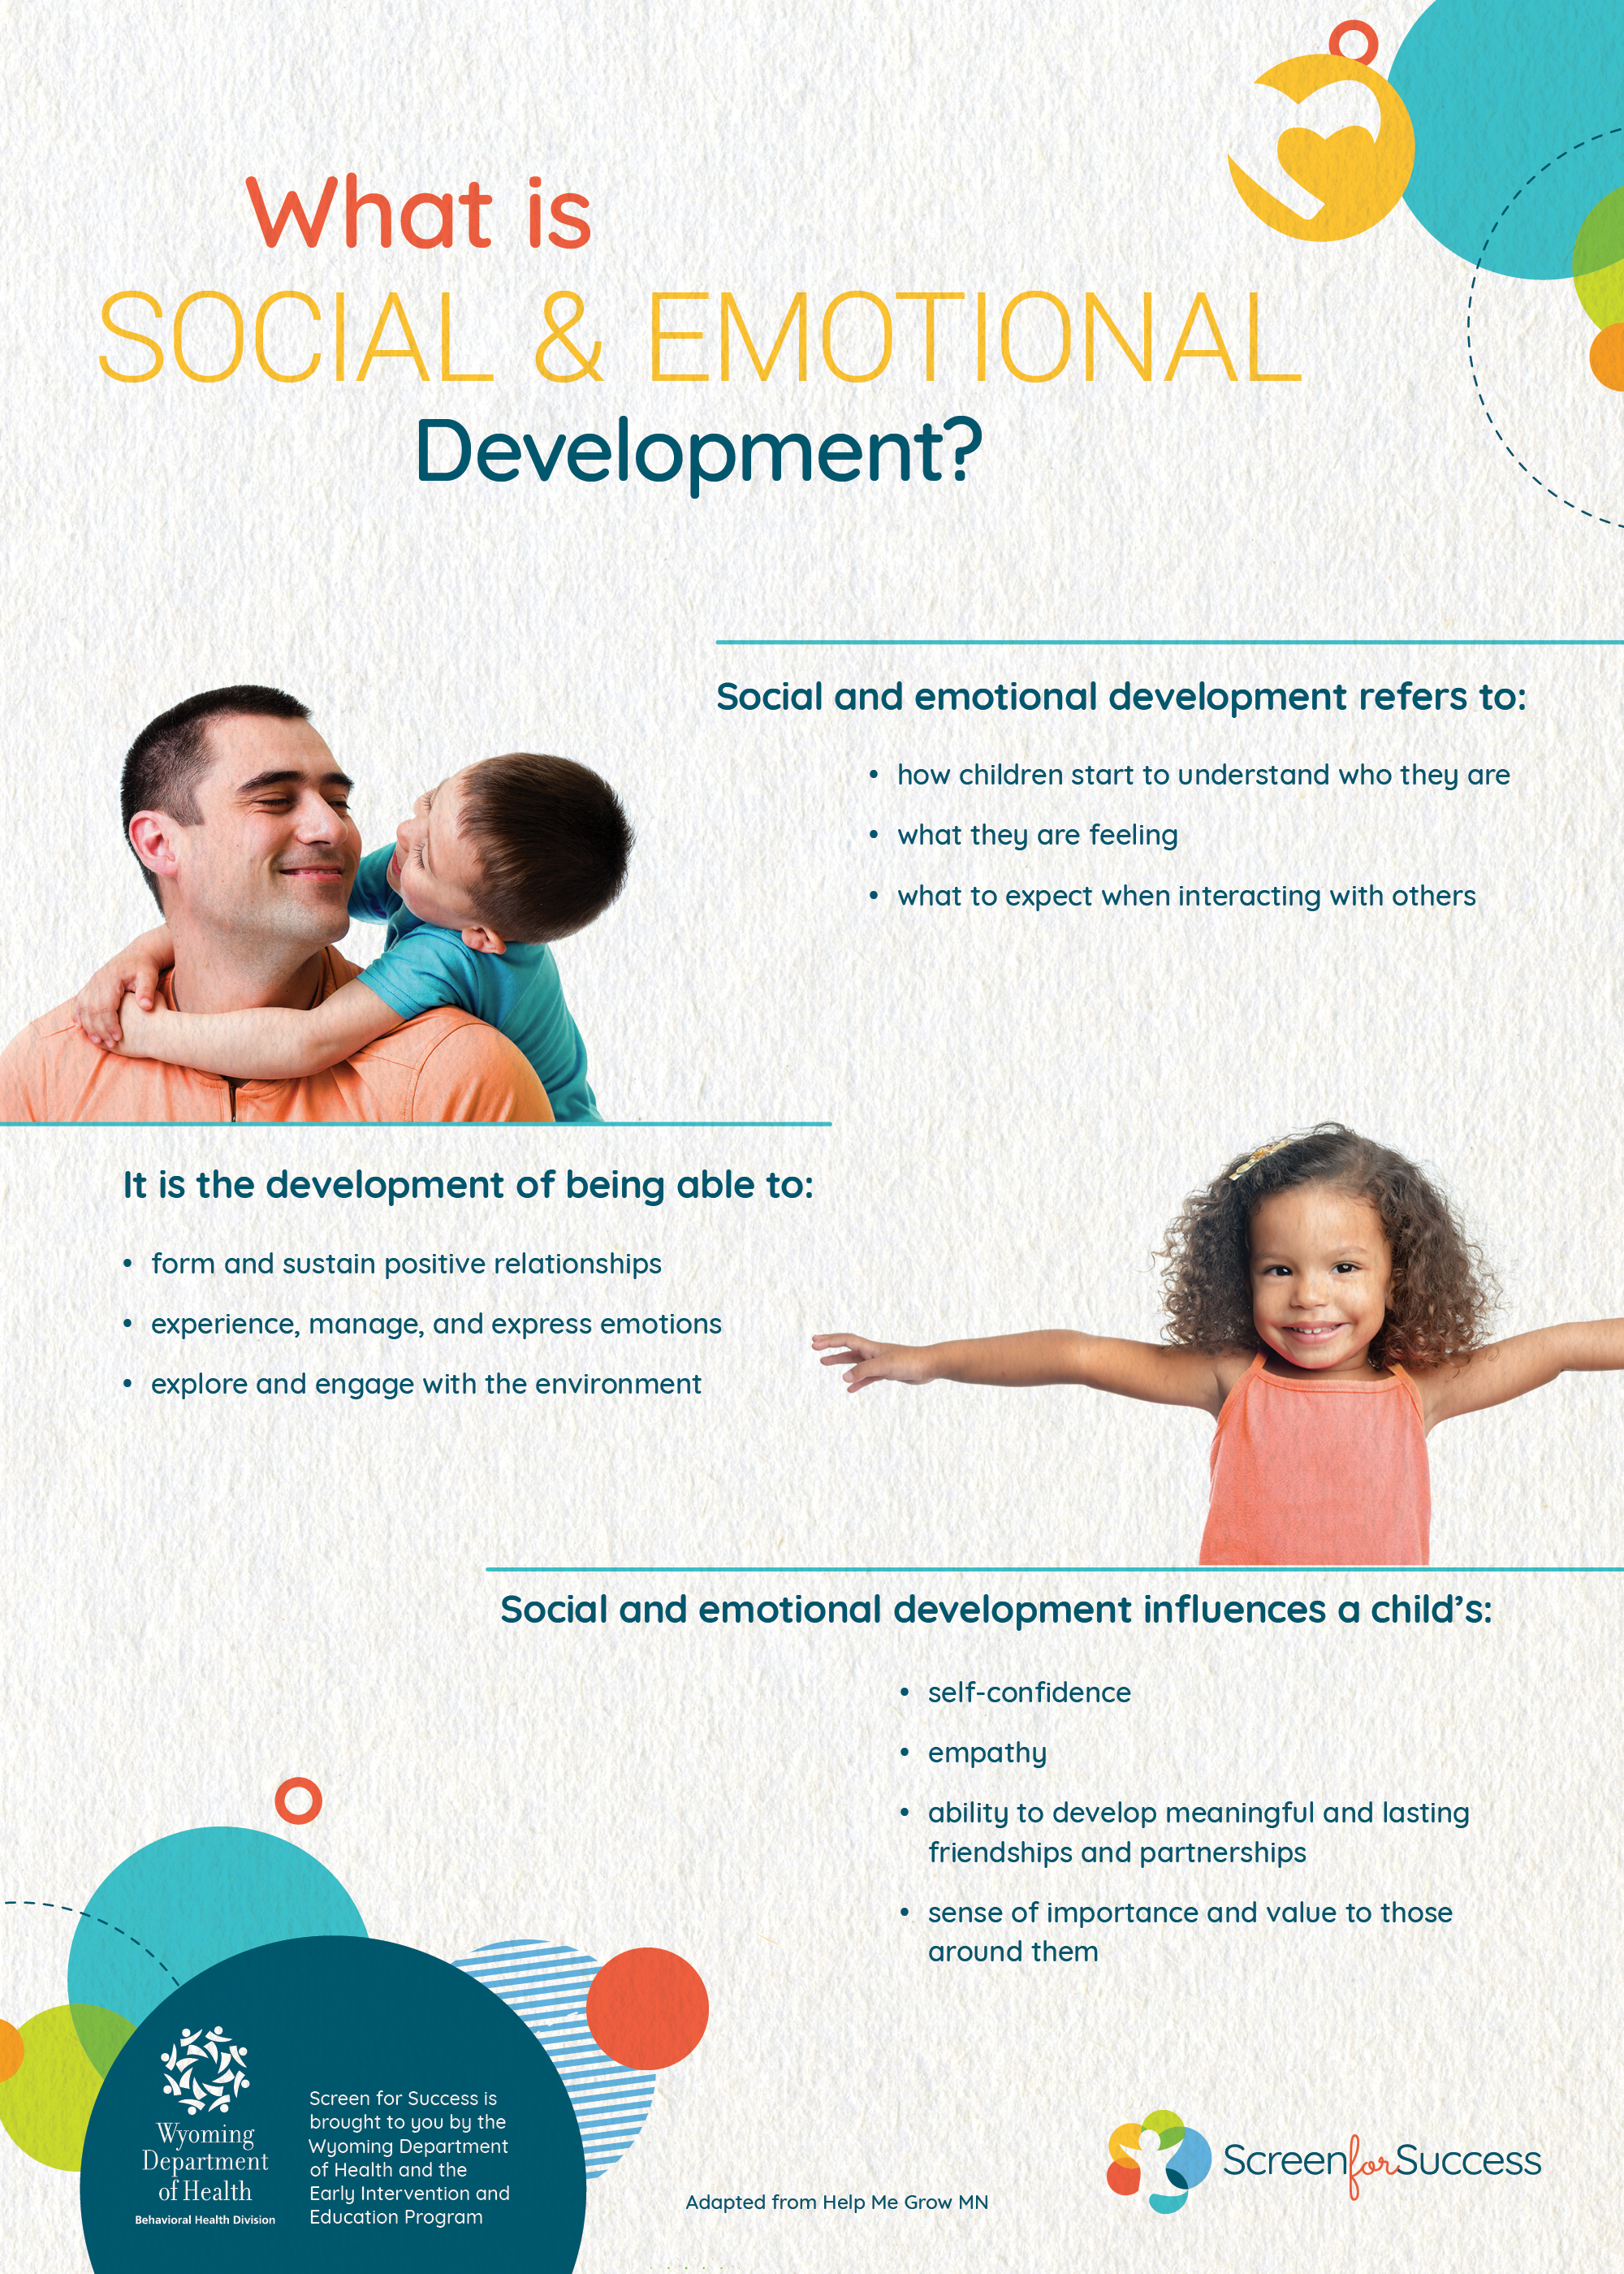 What is Social & Emotional Development?